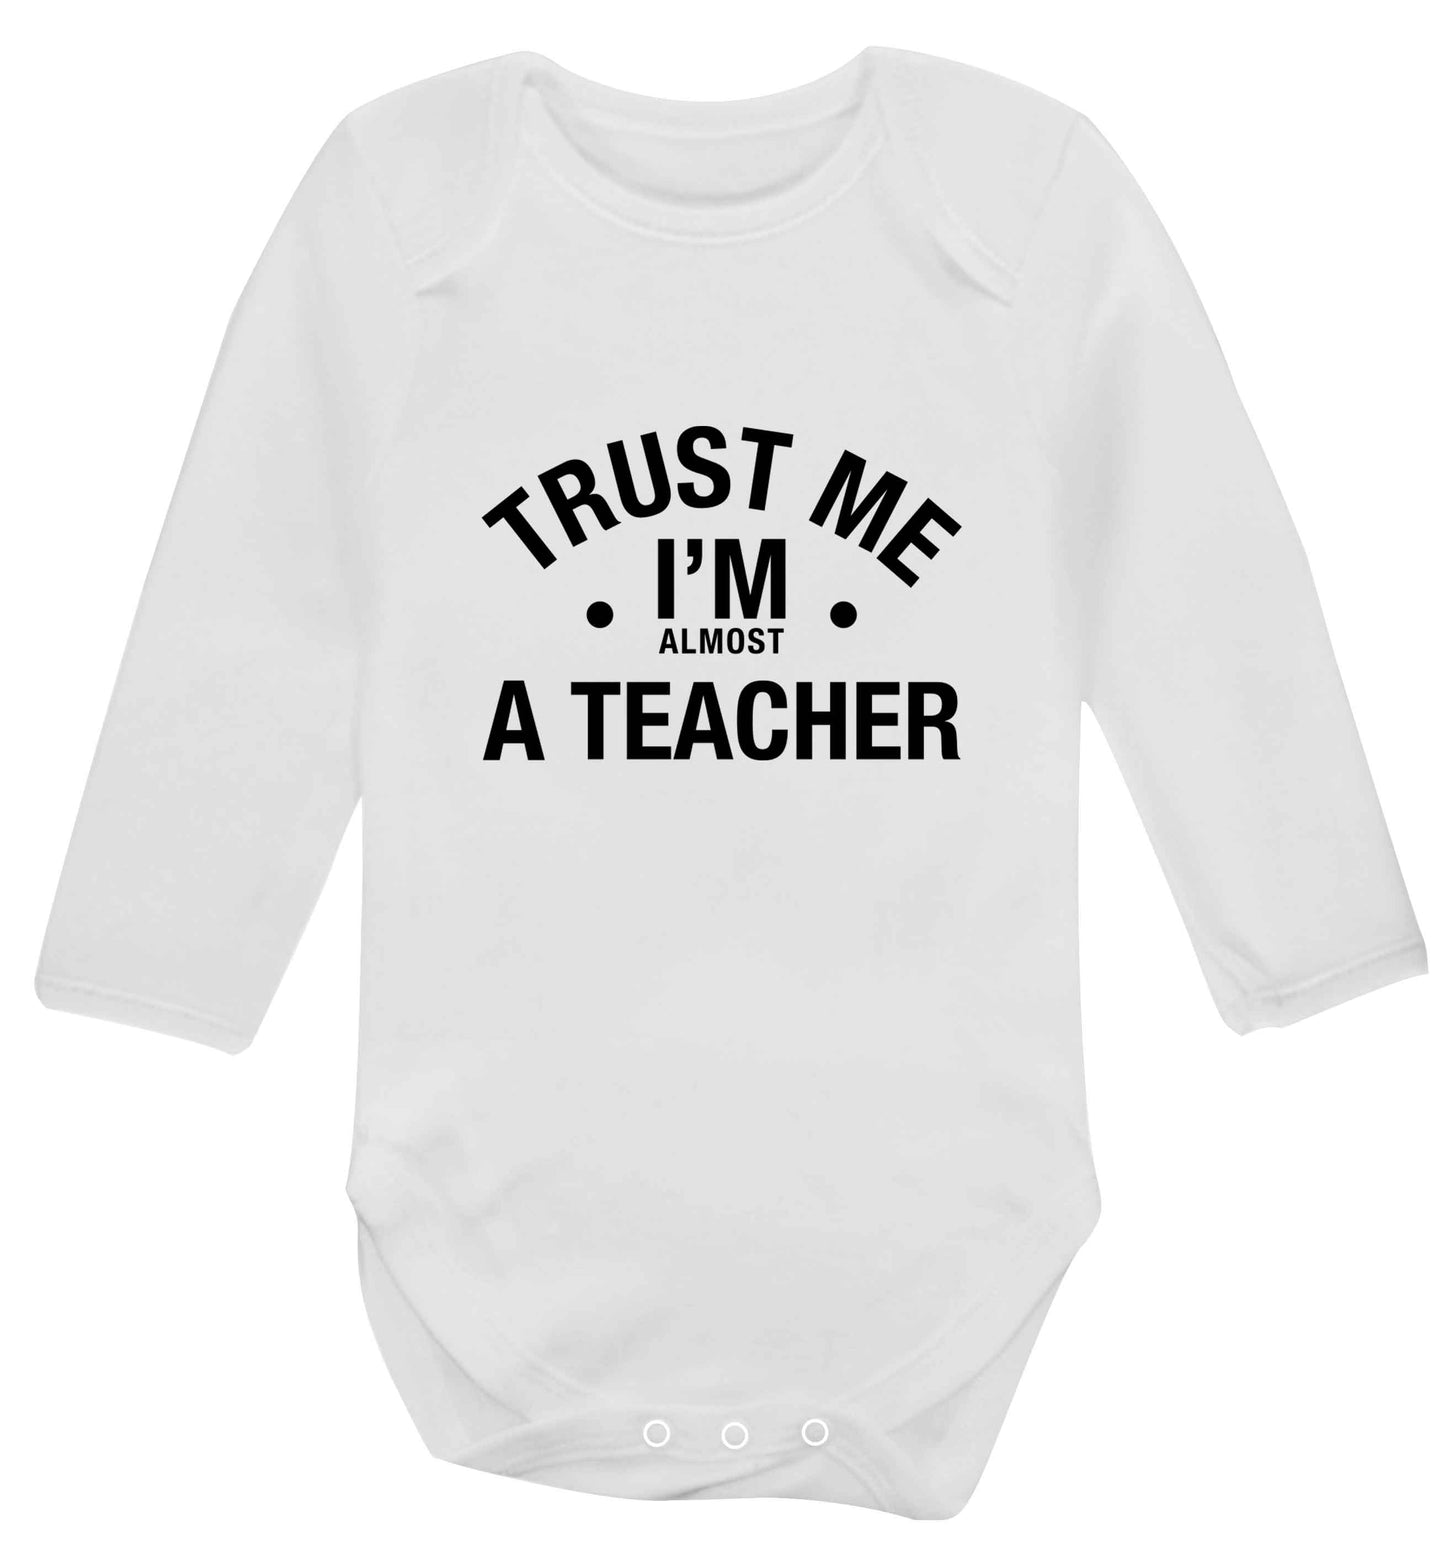 Trust me I'm almost a teacher baby vest long sleeved white 6-12 months